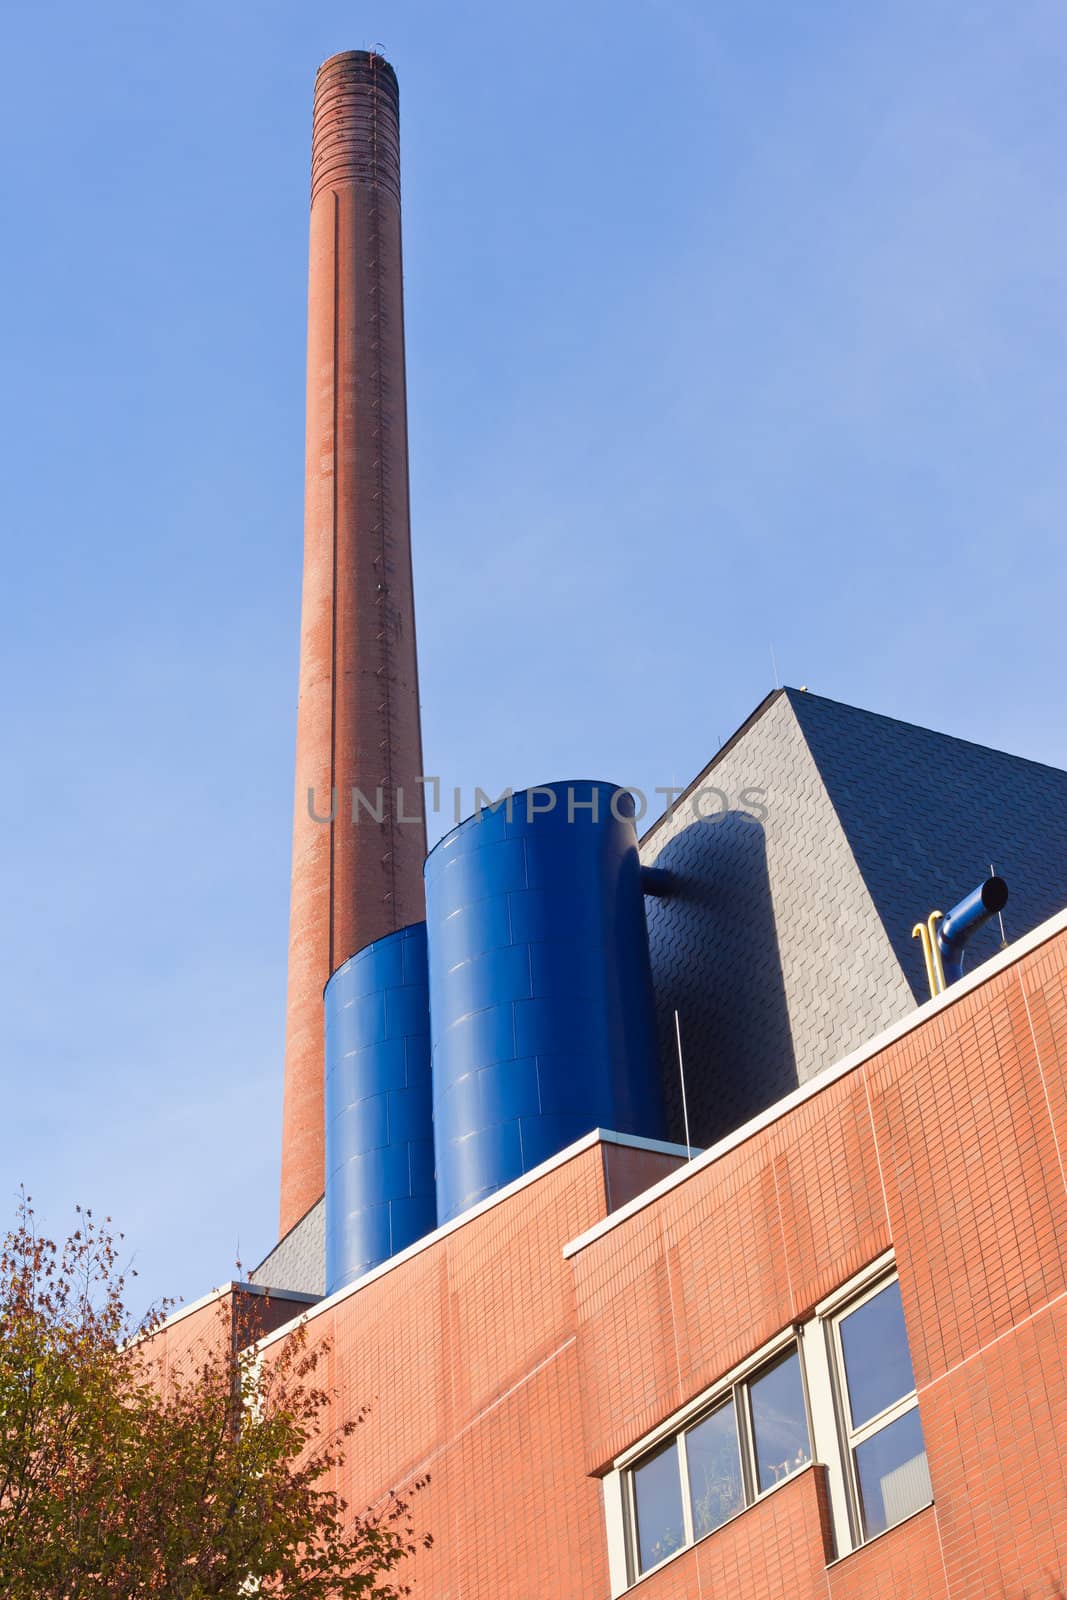 Red brick industrial chimney by PiLens